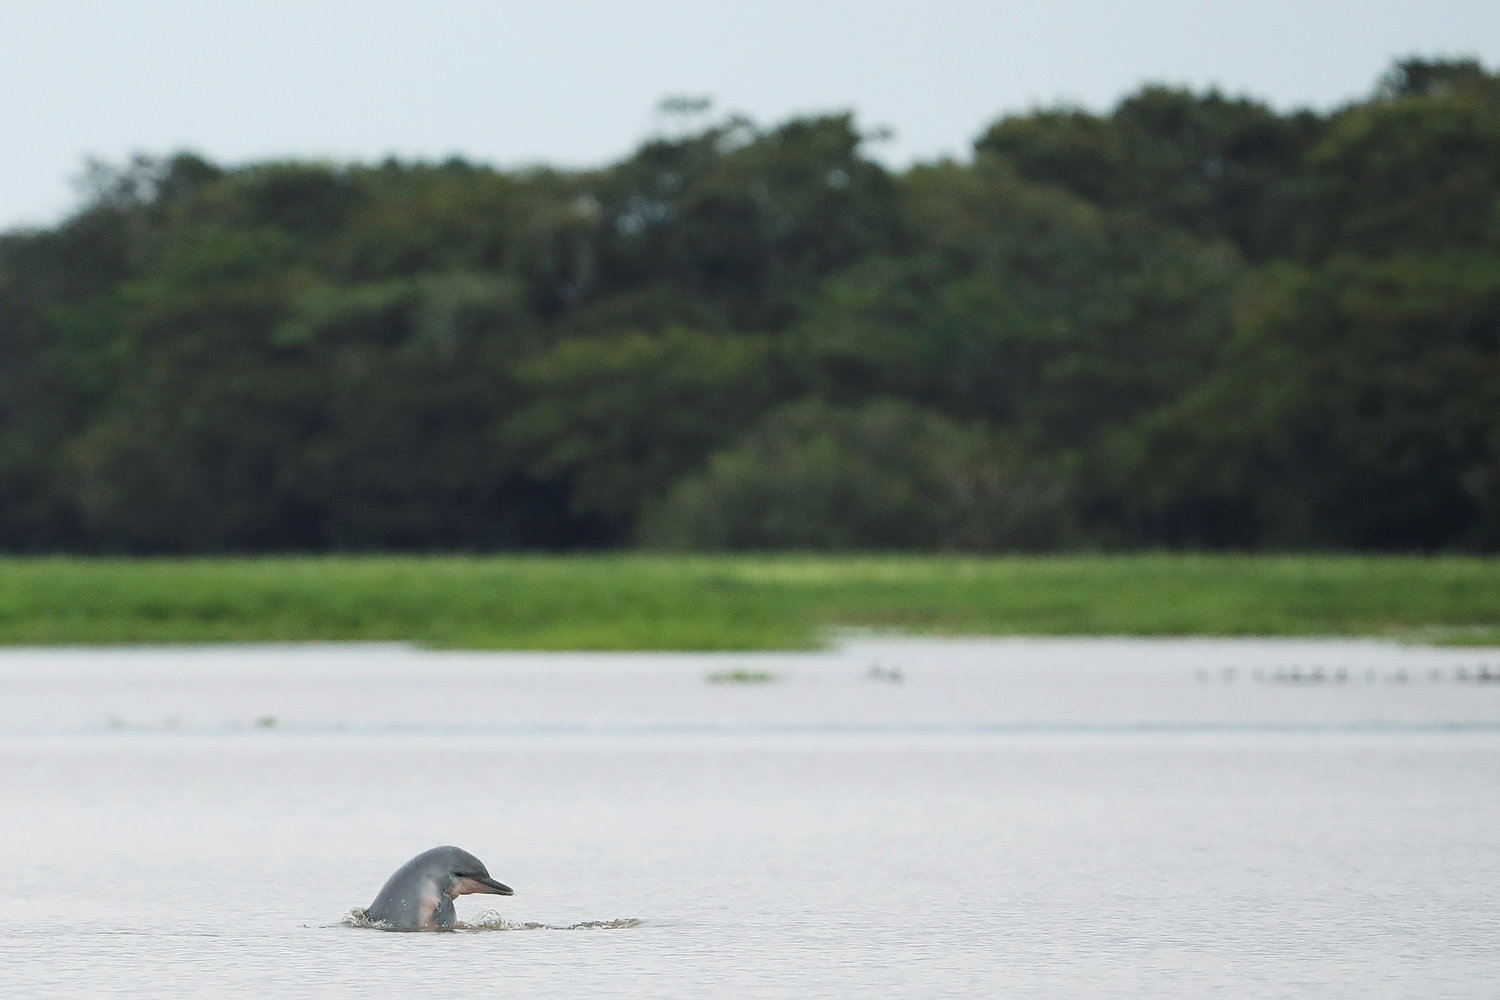 A Tucuxi dolphin is pictured at the Amazon’s Mamiraua Sustainable Development Reserve in Uarini, Brazil, Jan. 19, 2020. The Vatican released Pope Francis’ postsynodal apostolic exhortation, “Querida Amazonia” (Beloved Amazonia), Feb. 12.